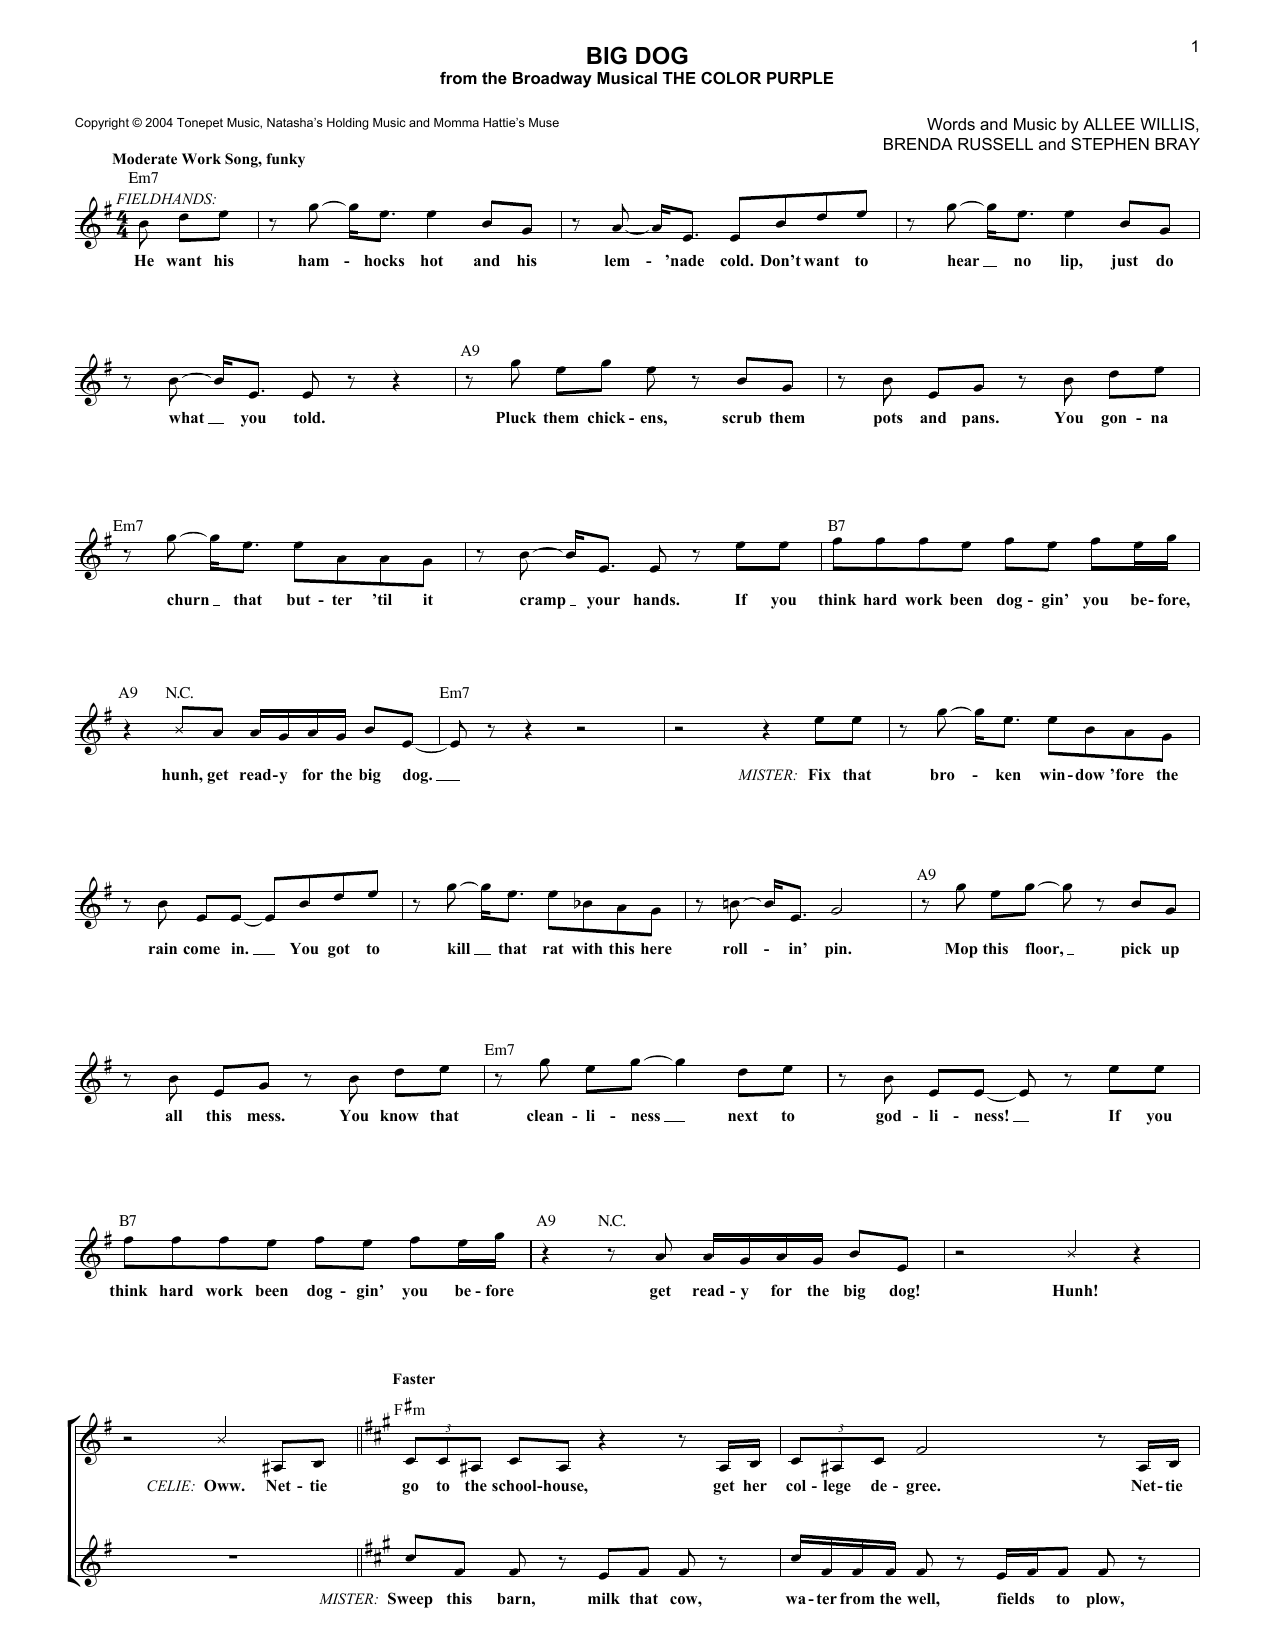 Download The Color Purple (Musical) Big Dog Sheet Music